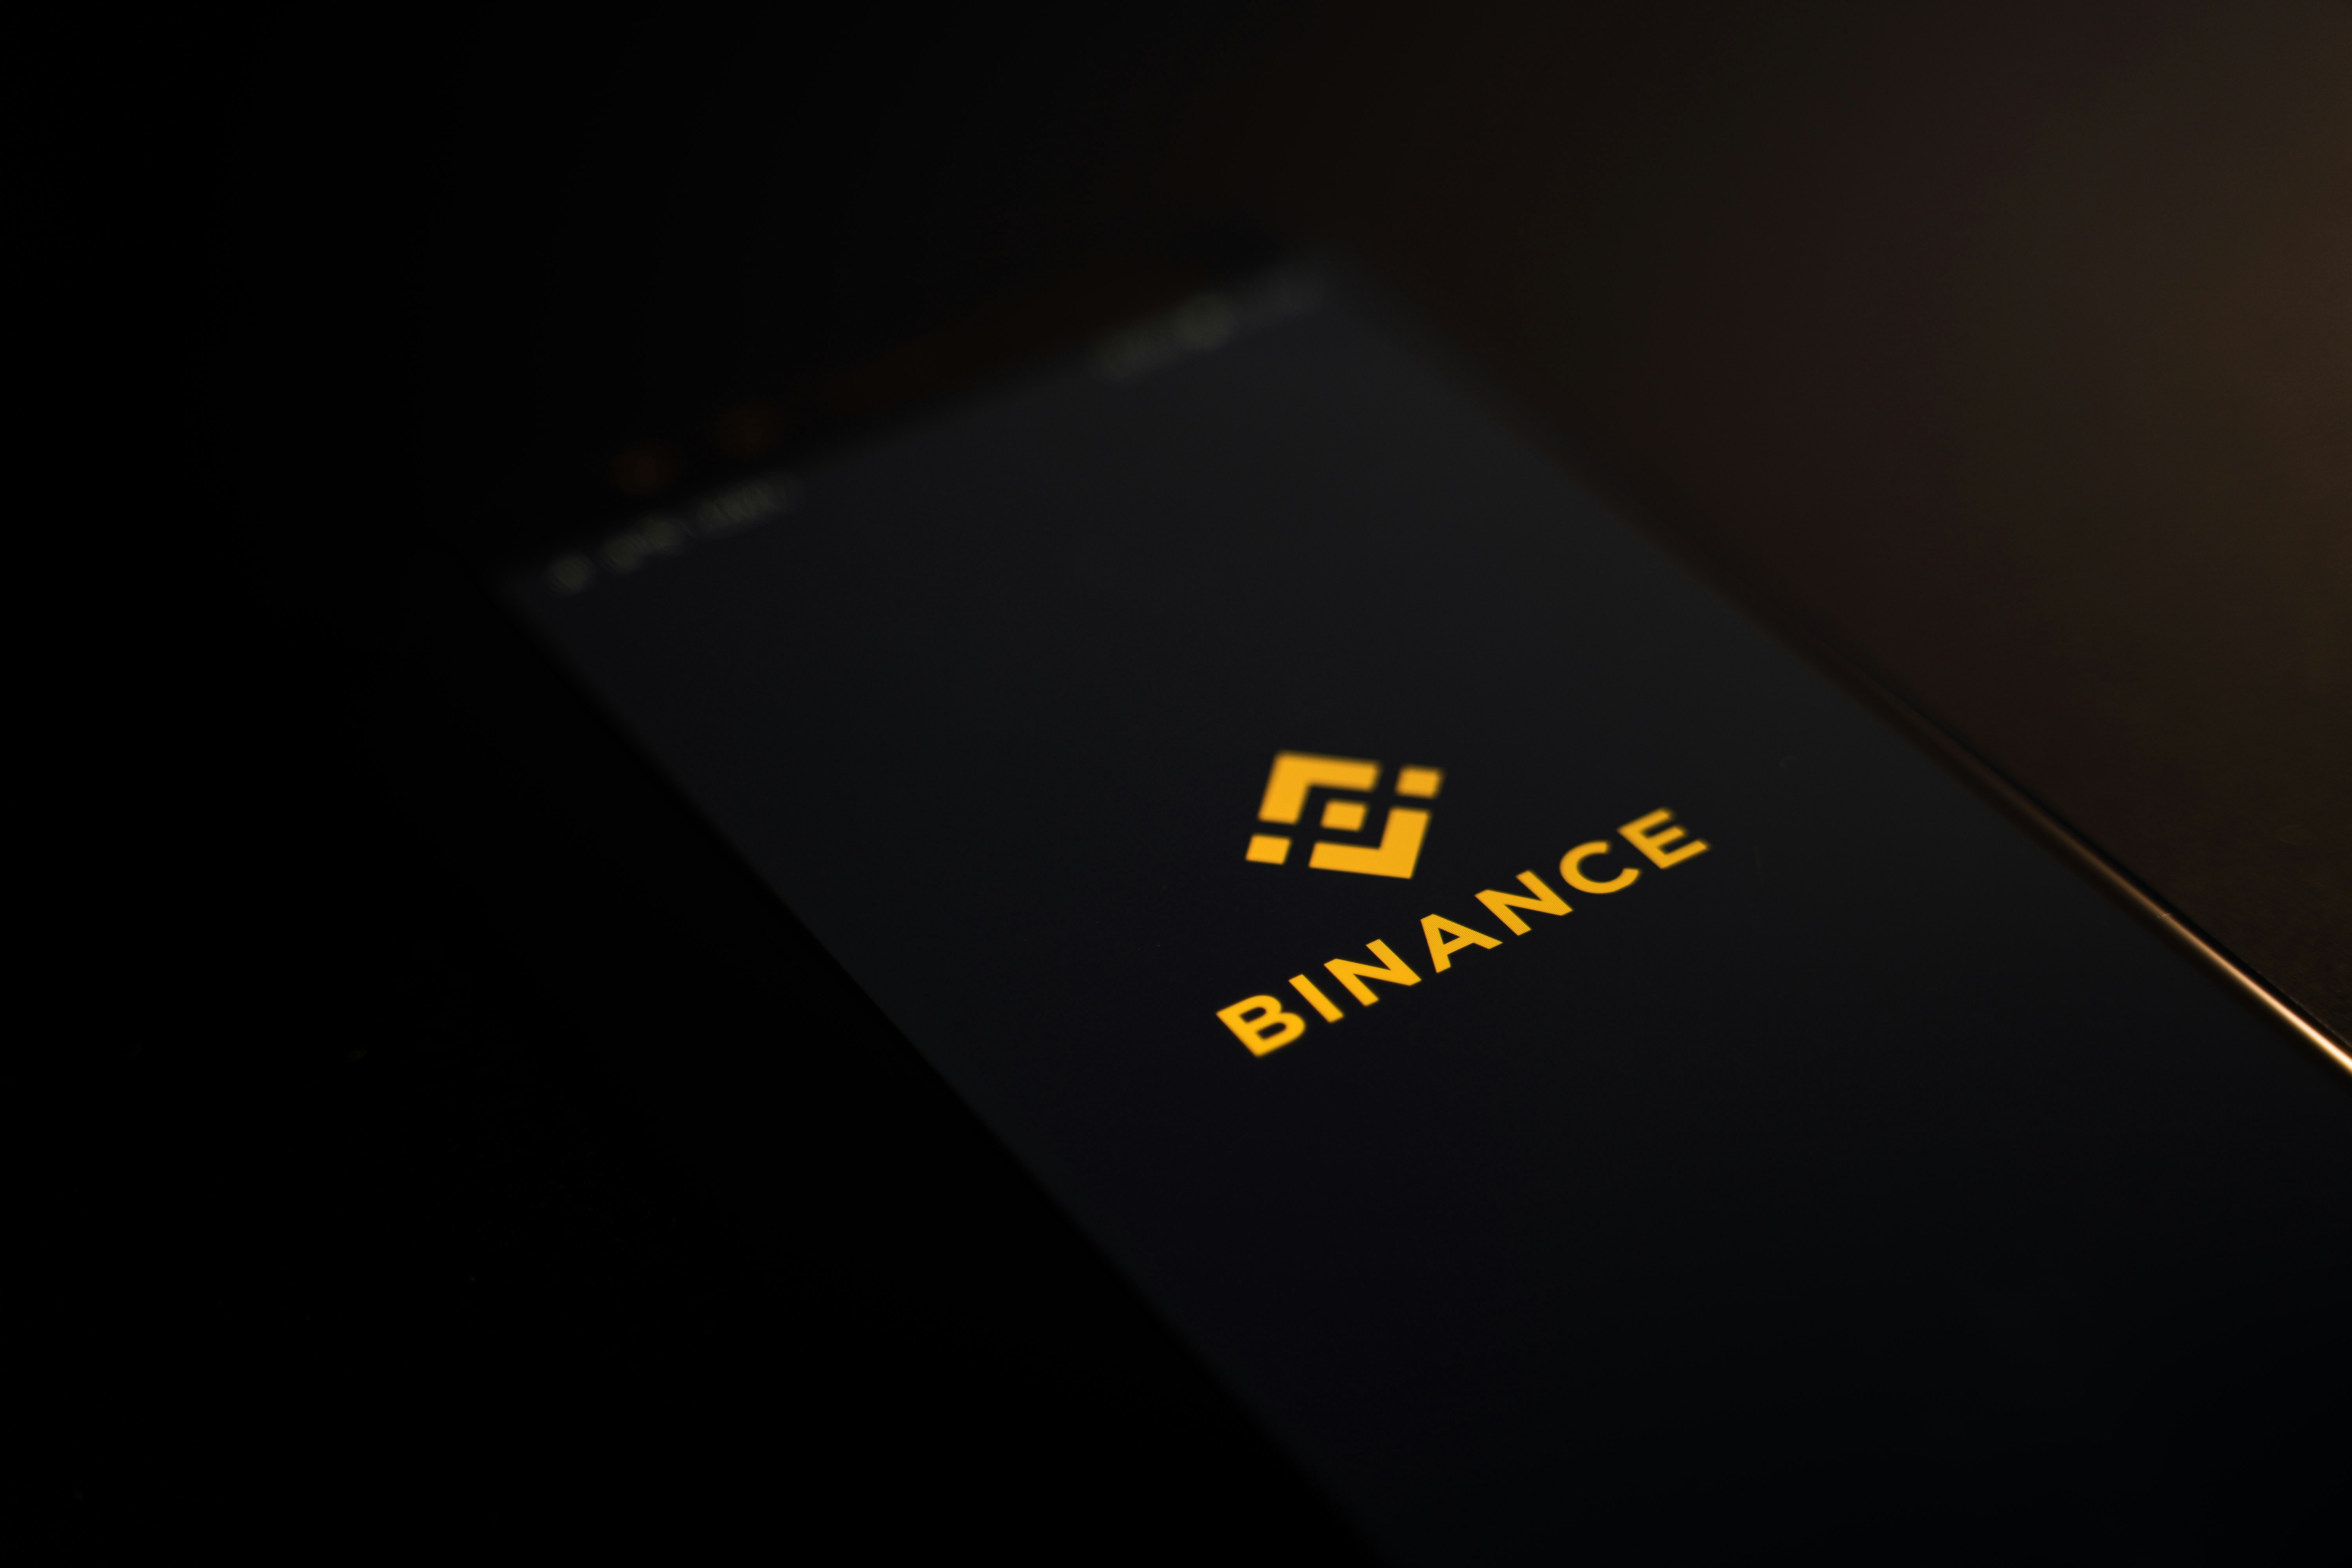 Binance Review: Fees, Features and Safety in 2021 - Coinbit